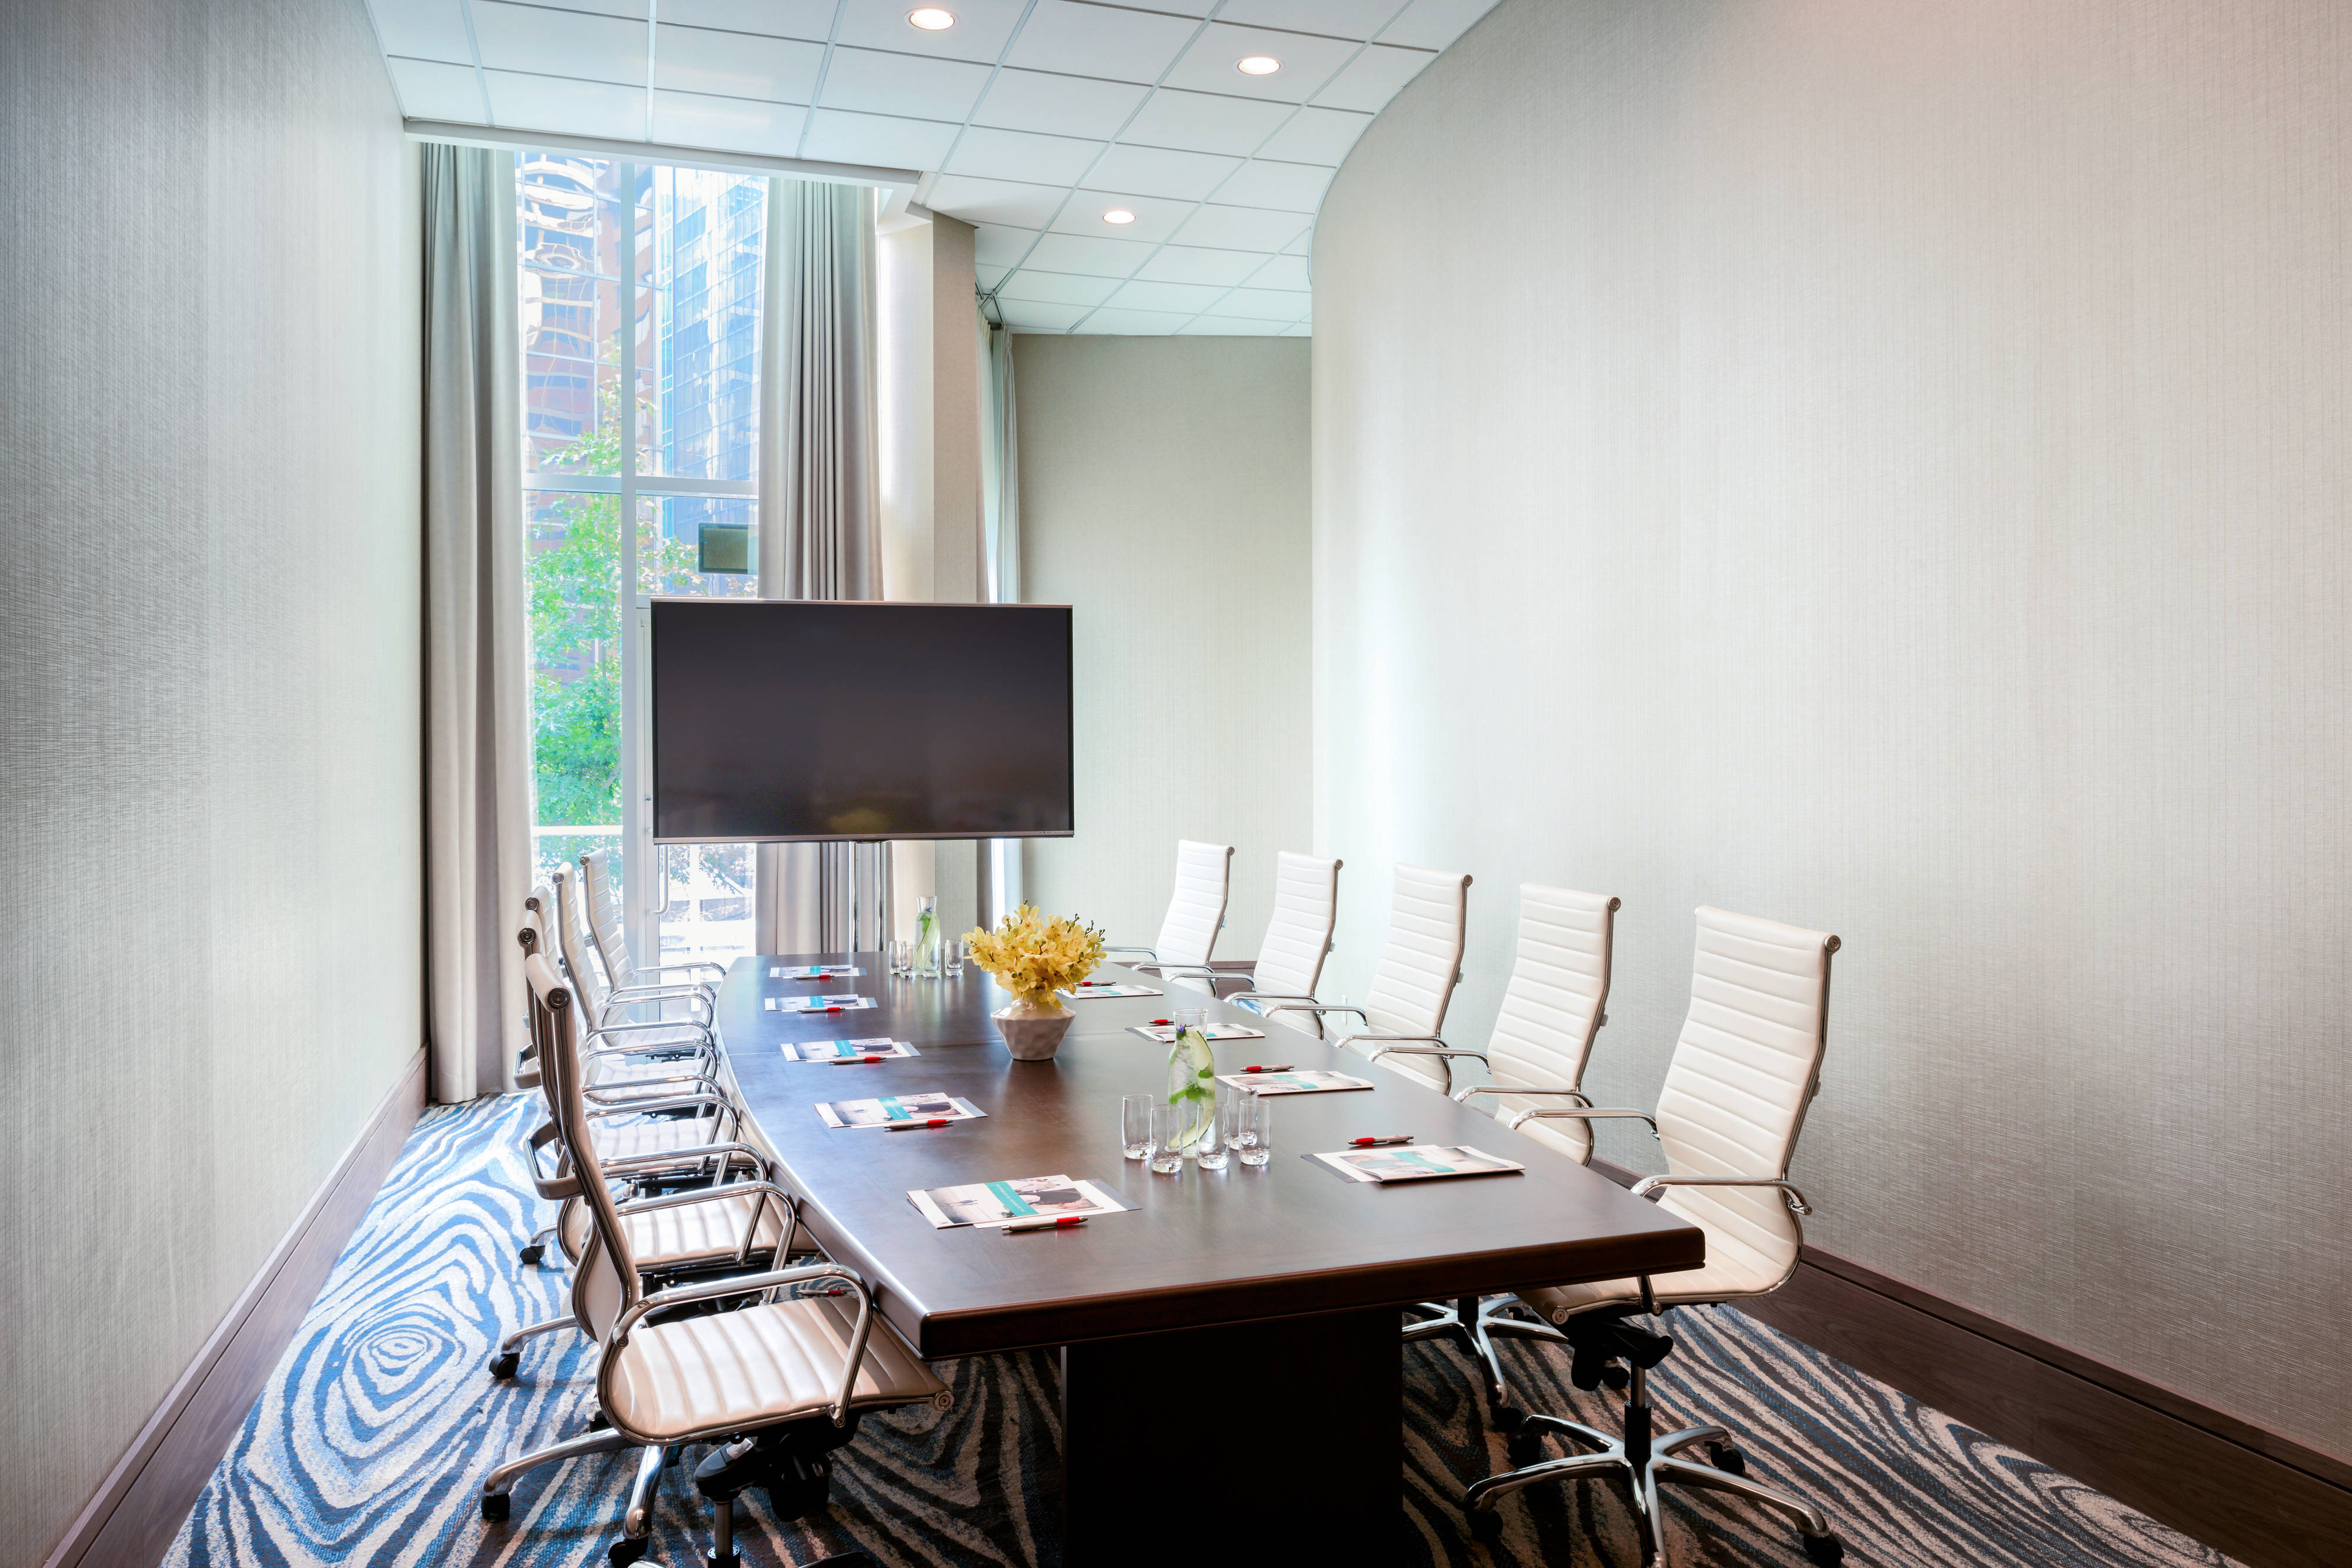 A conference table with a projector screen in a room with tall windows.